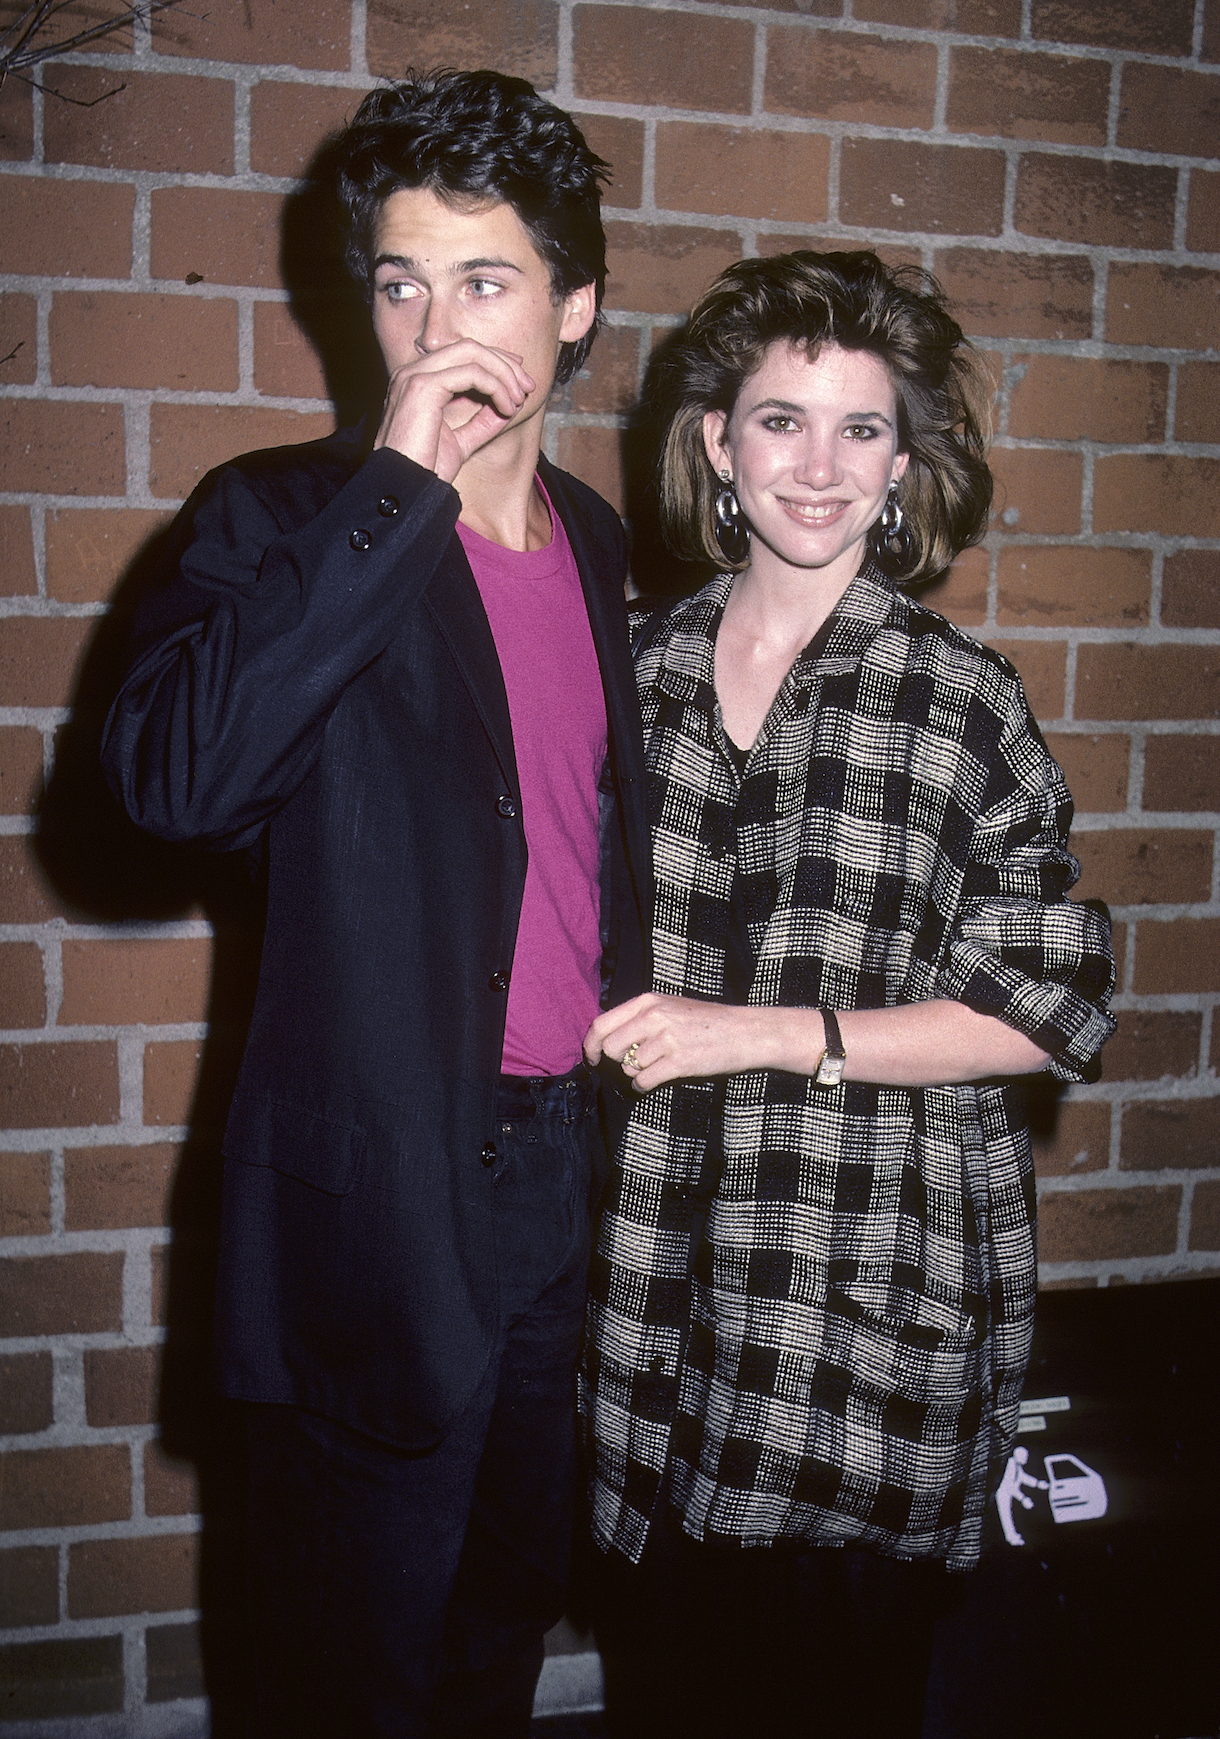 Actor Rob Lowe and actress Melissa Gilbert attend "The Hotel New Hampshire" West Hollywood Premiere in 1984